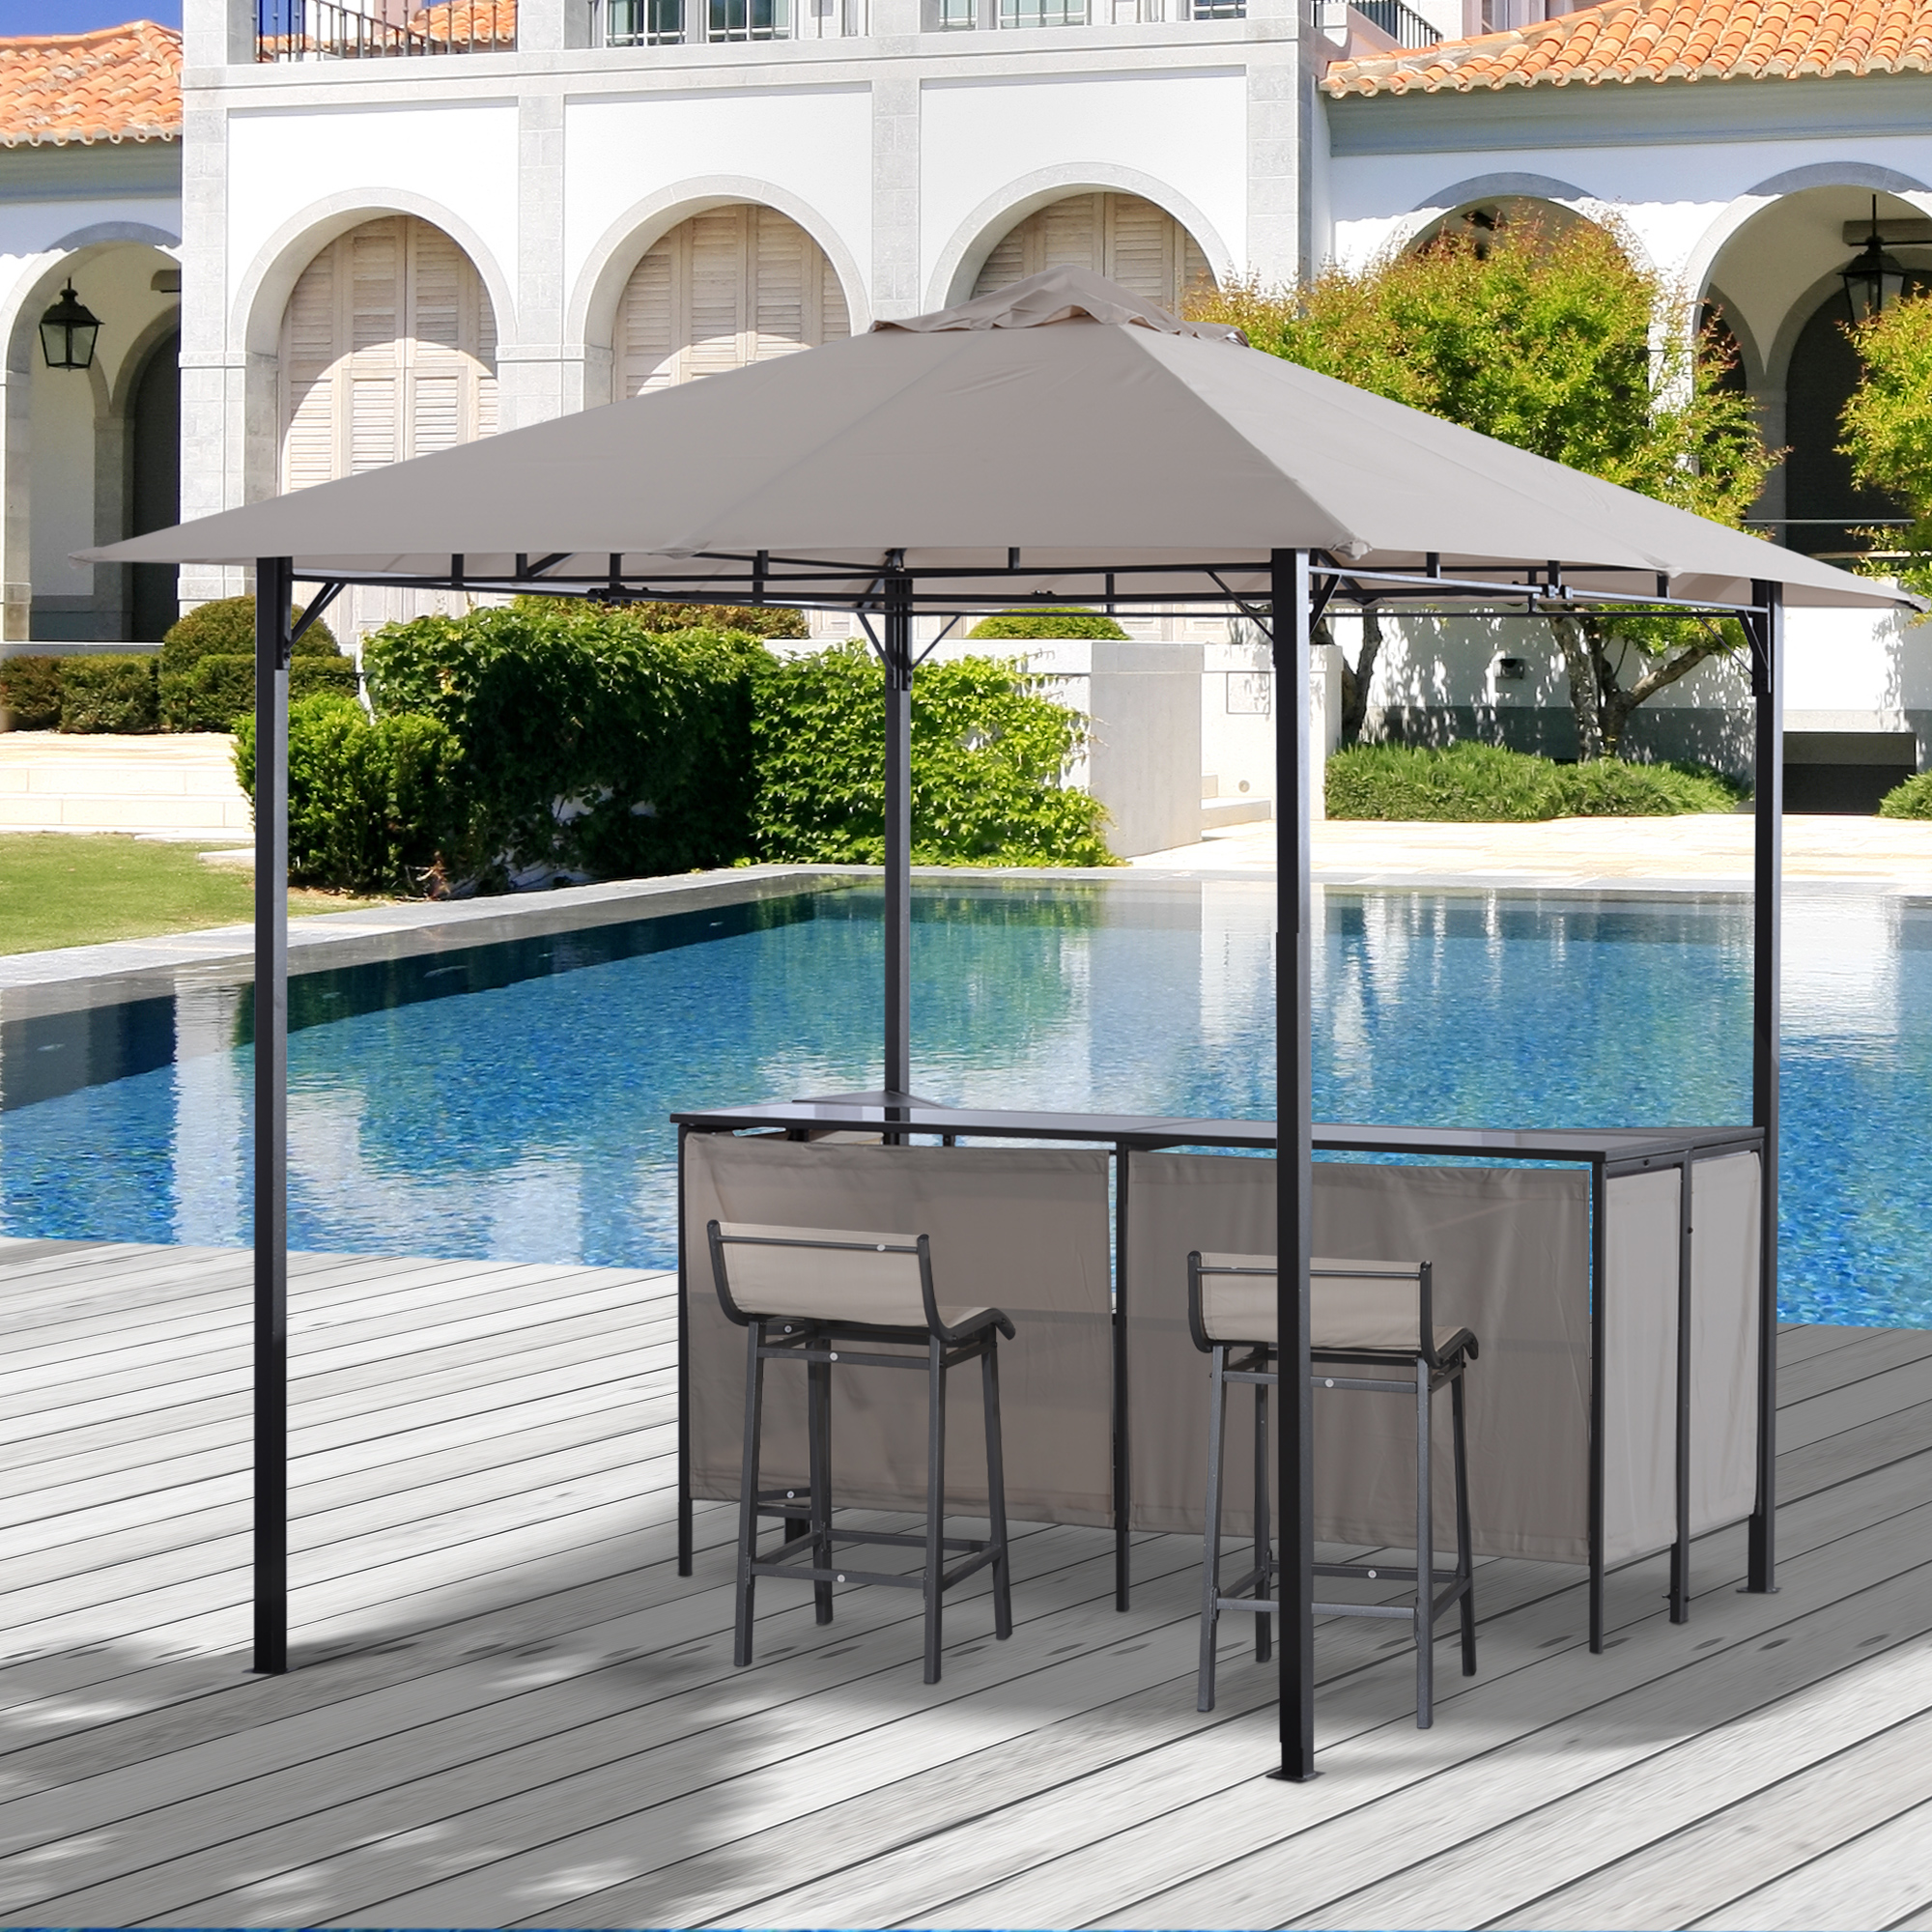 Outsunny Outdoor Bar Table Set Cloth Canopy & 2 Chairs Patio Backyard Furniture - image 2 of 9